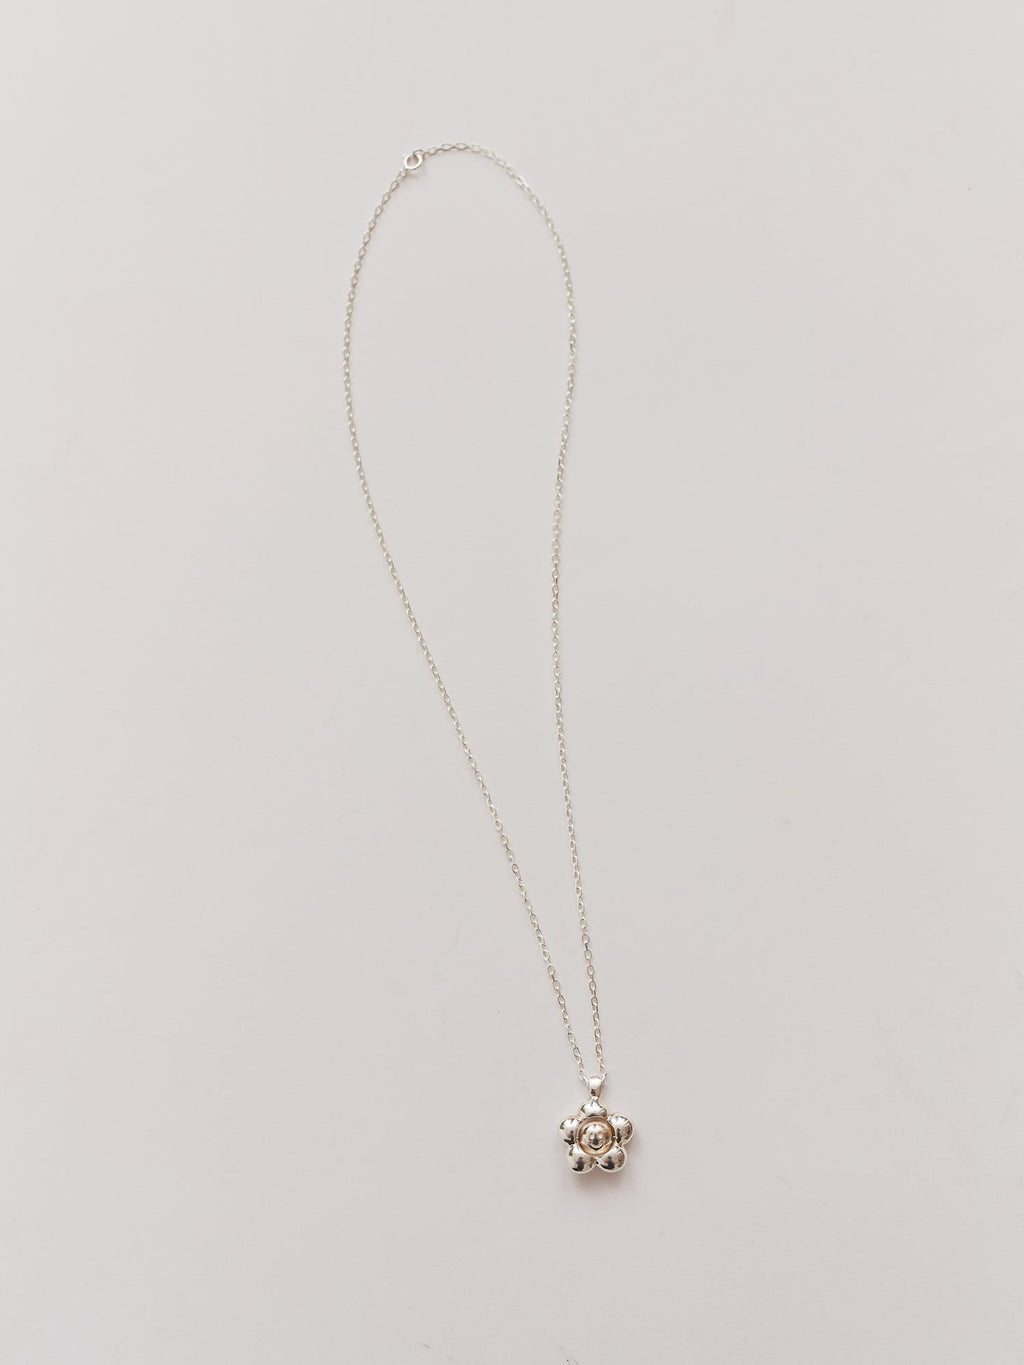 LO x Good Daze Never Been Picked Silver Necklace